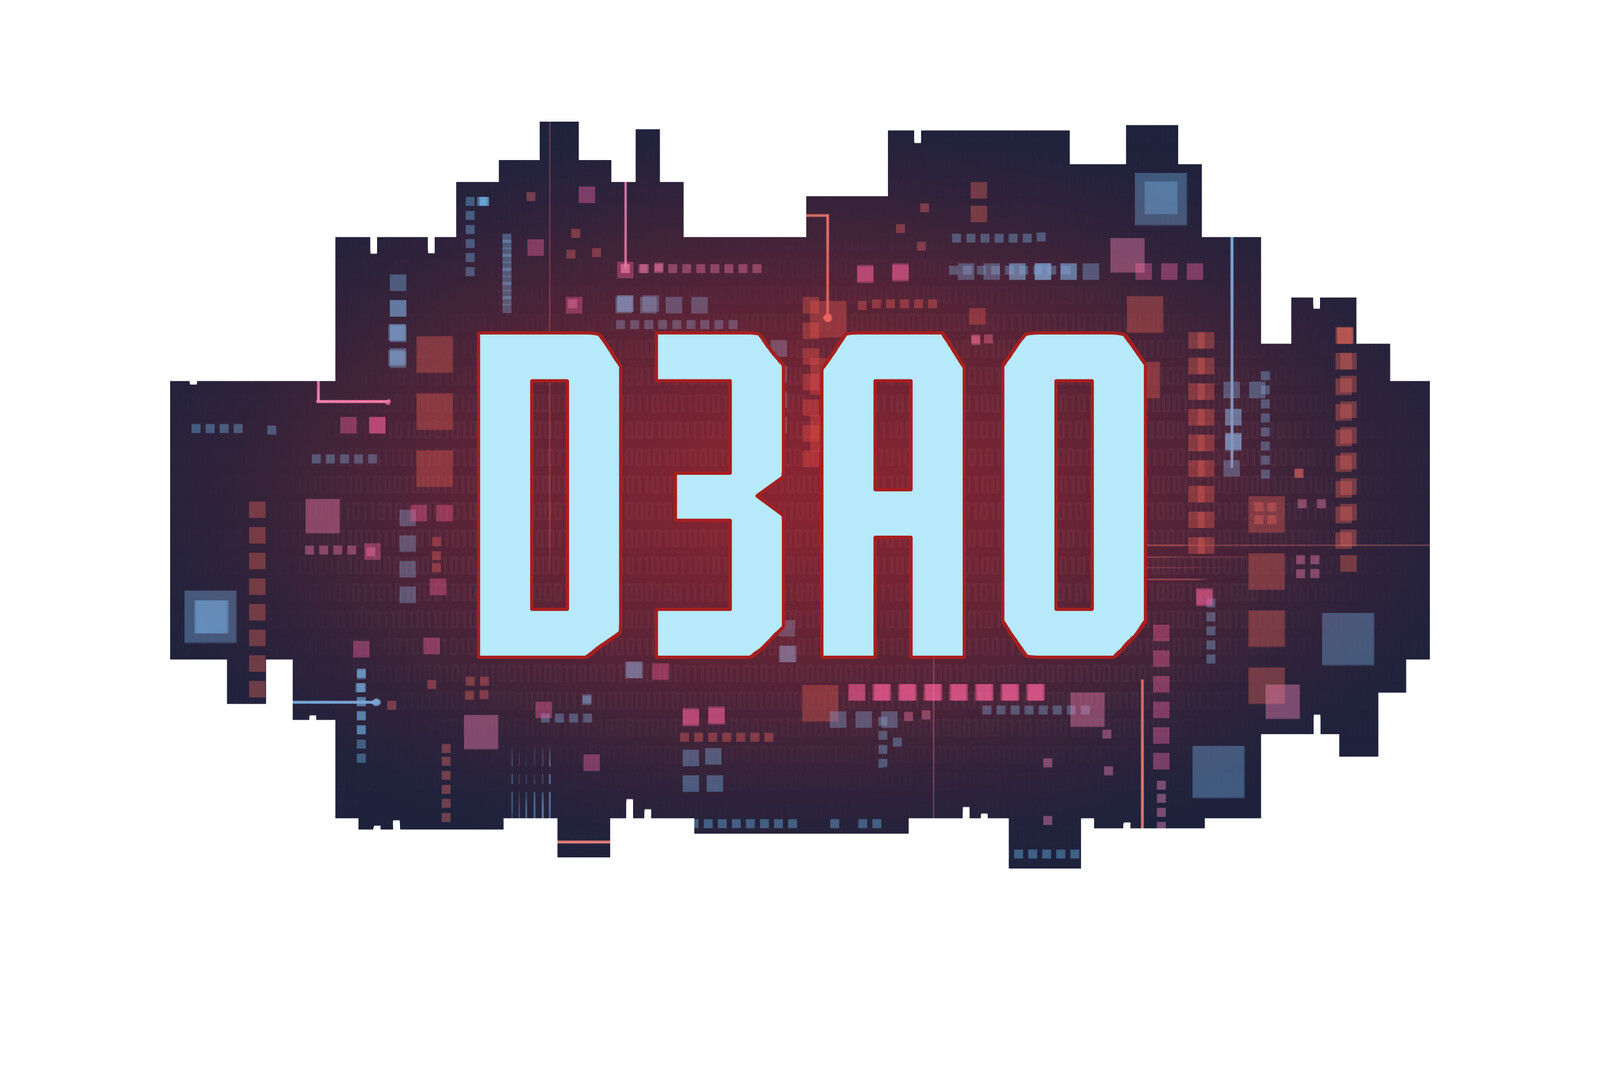 D3A0 - A hacking collective in Utopia